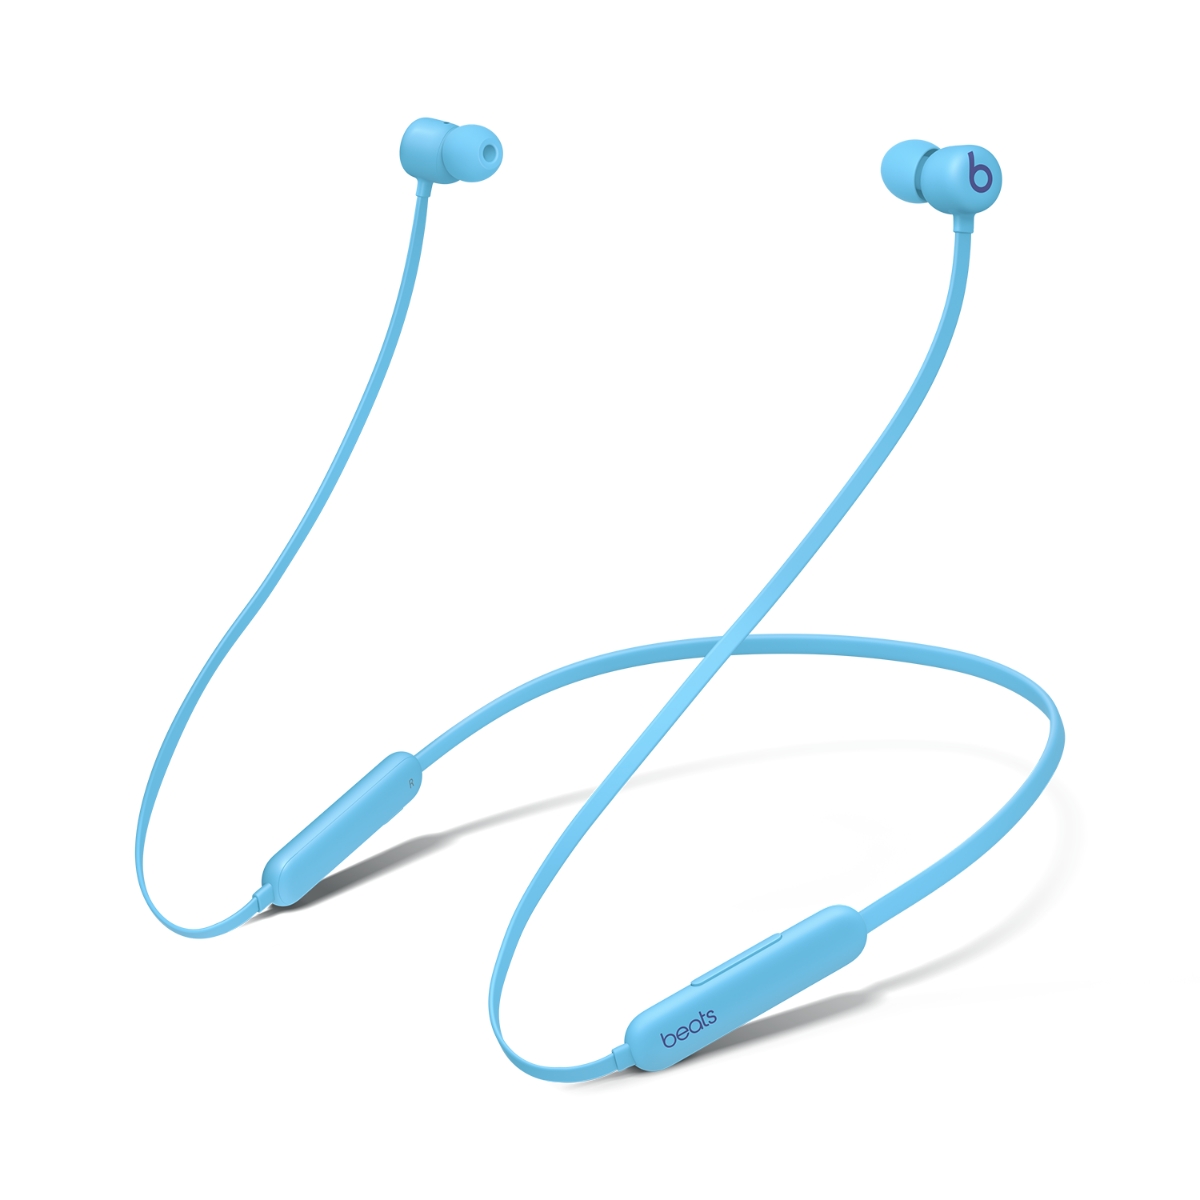 Floating Beats Flex in Flame Blue